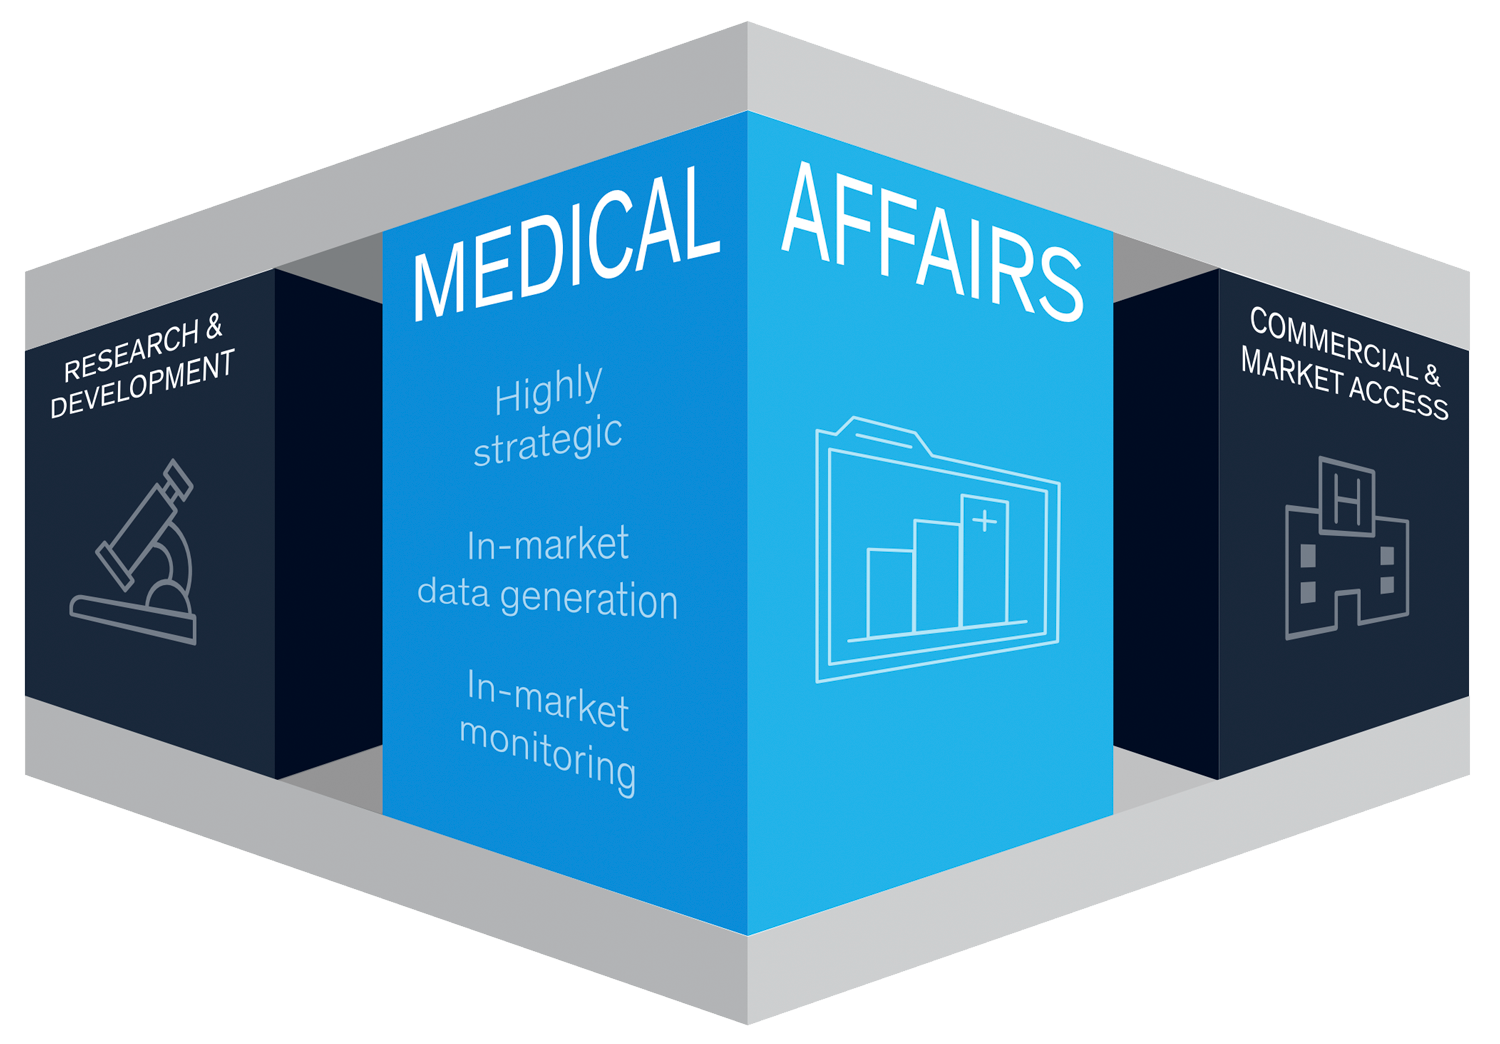 "A vision for Medical Affairs in 2025," McKinsey & Company, 2019